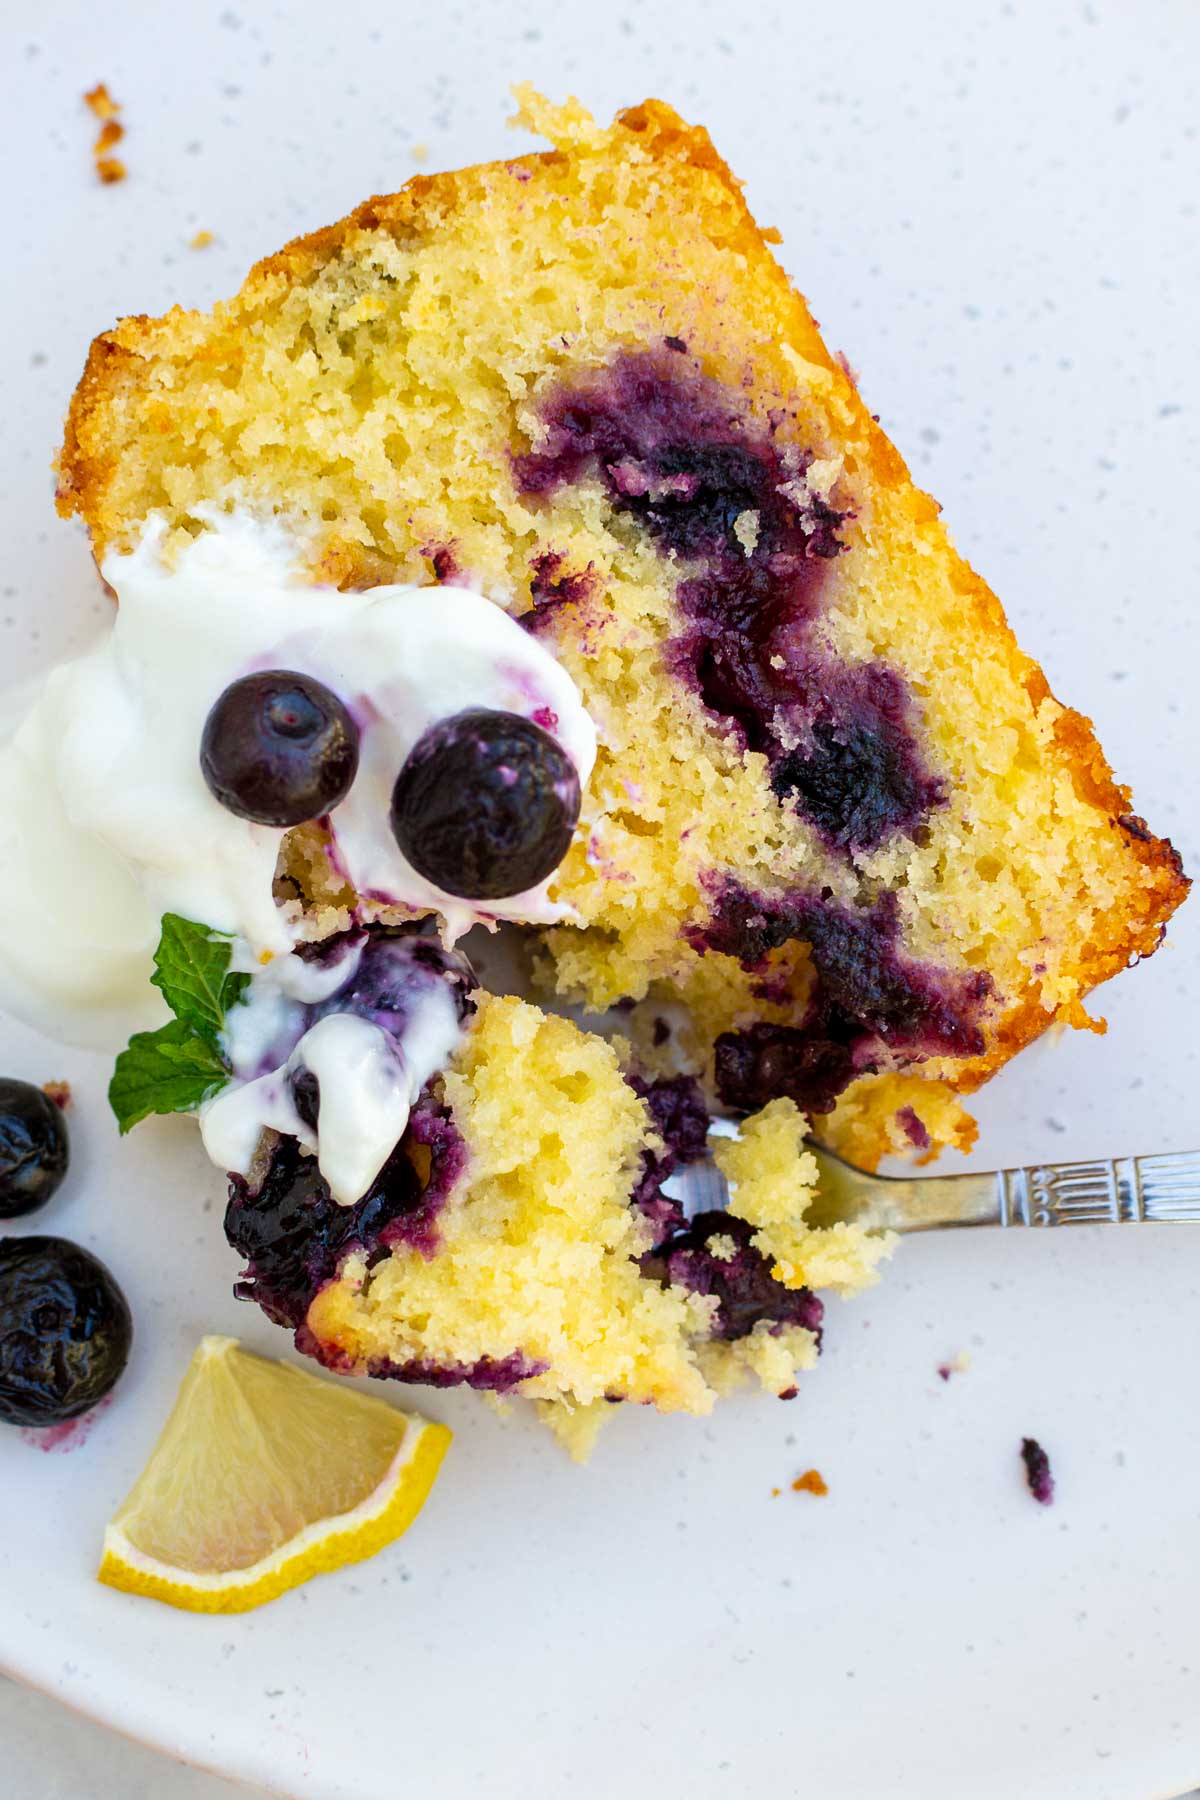 Overhead view of a slice of lemon curd cake with blueberries with Greek yogurt on top on a white plate with a fork.